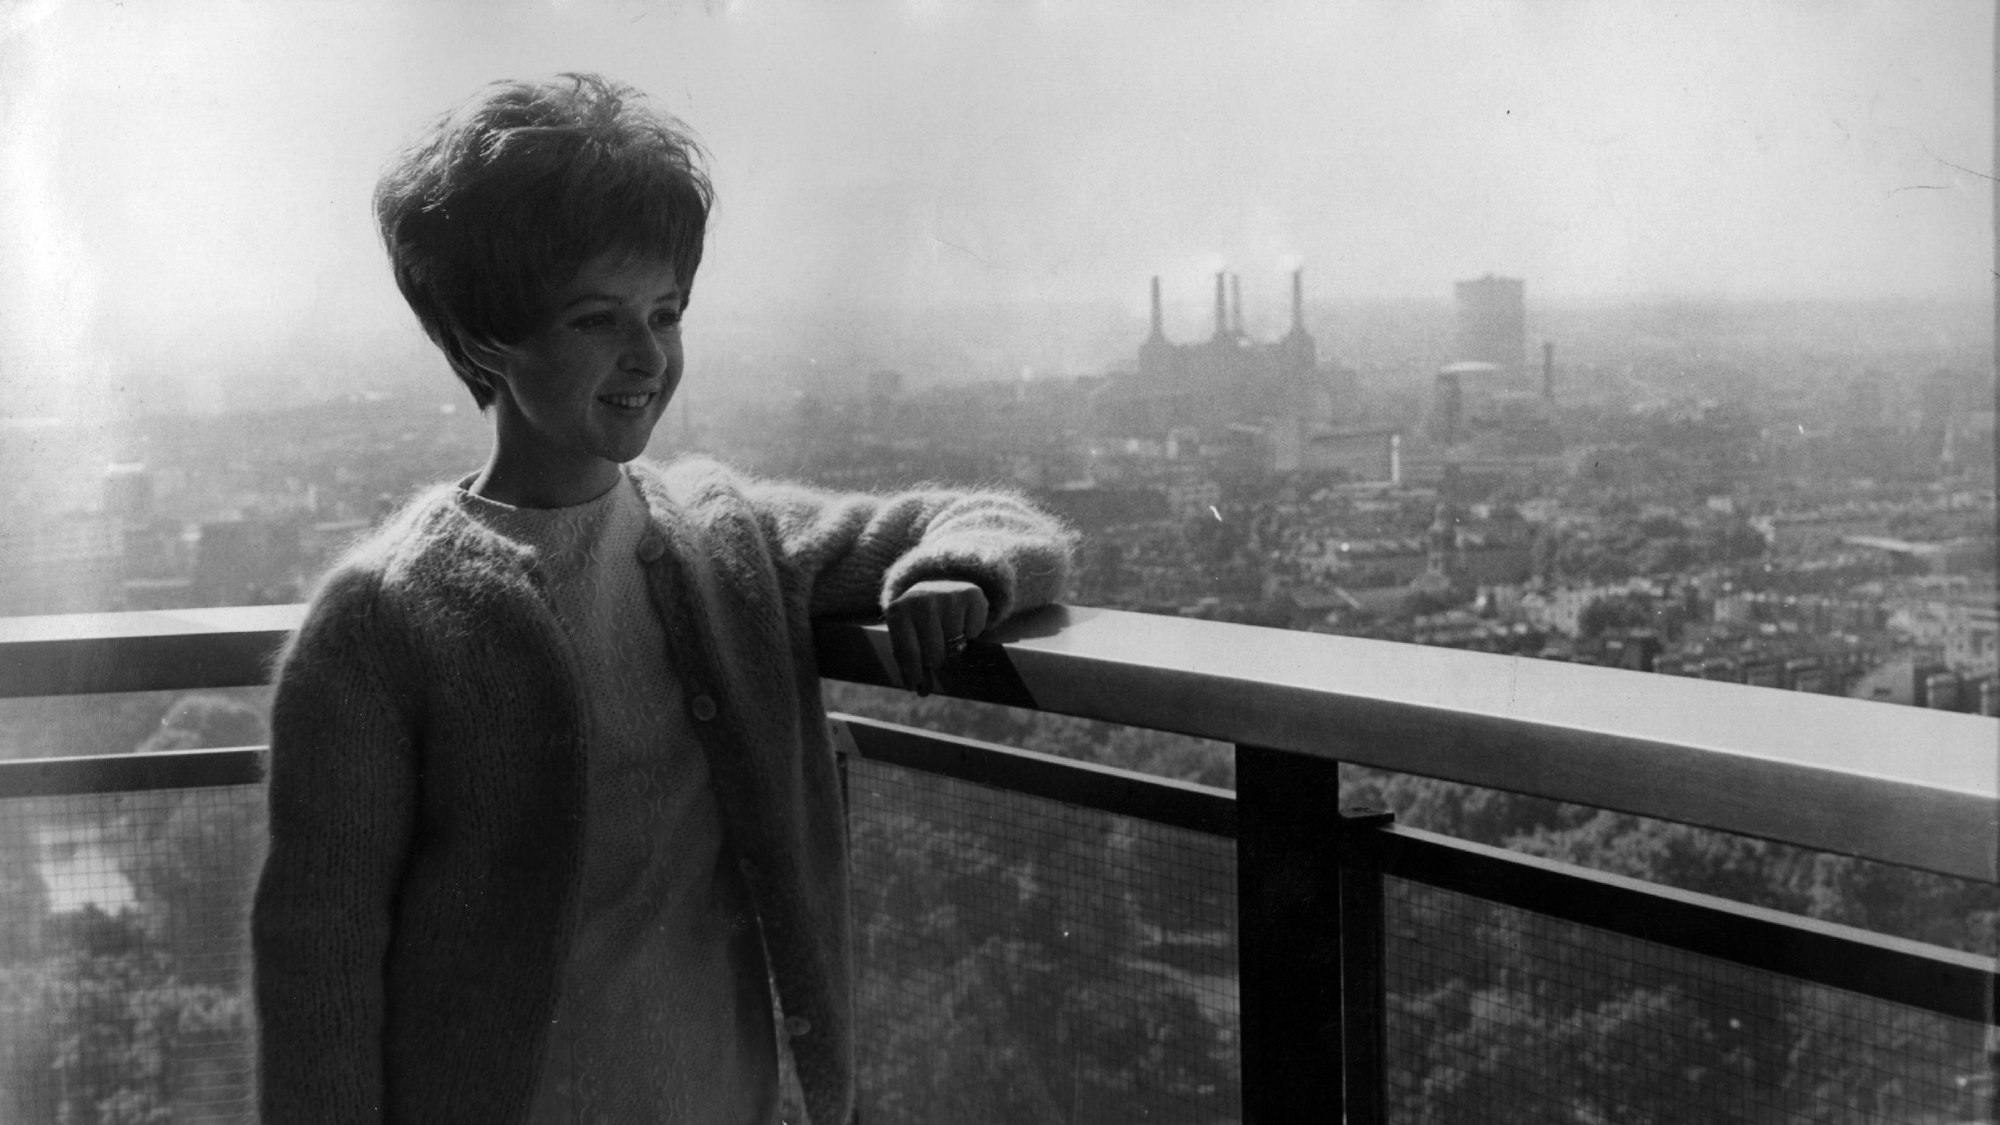 20th August 1964:  American pop star Brenda Lee admires the view from her Hilton Hotel apartment during a trip to London for recording and TV appearances. Battersea power station can be seen in the distance.  (Photo by Kent Gavin/Keystone/Getty Images)